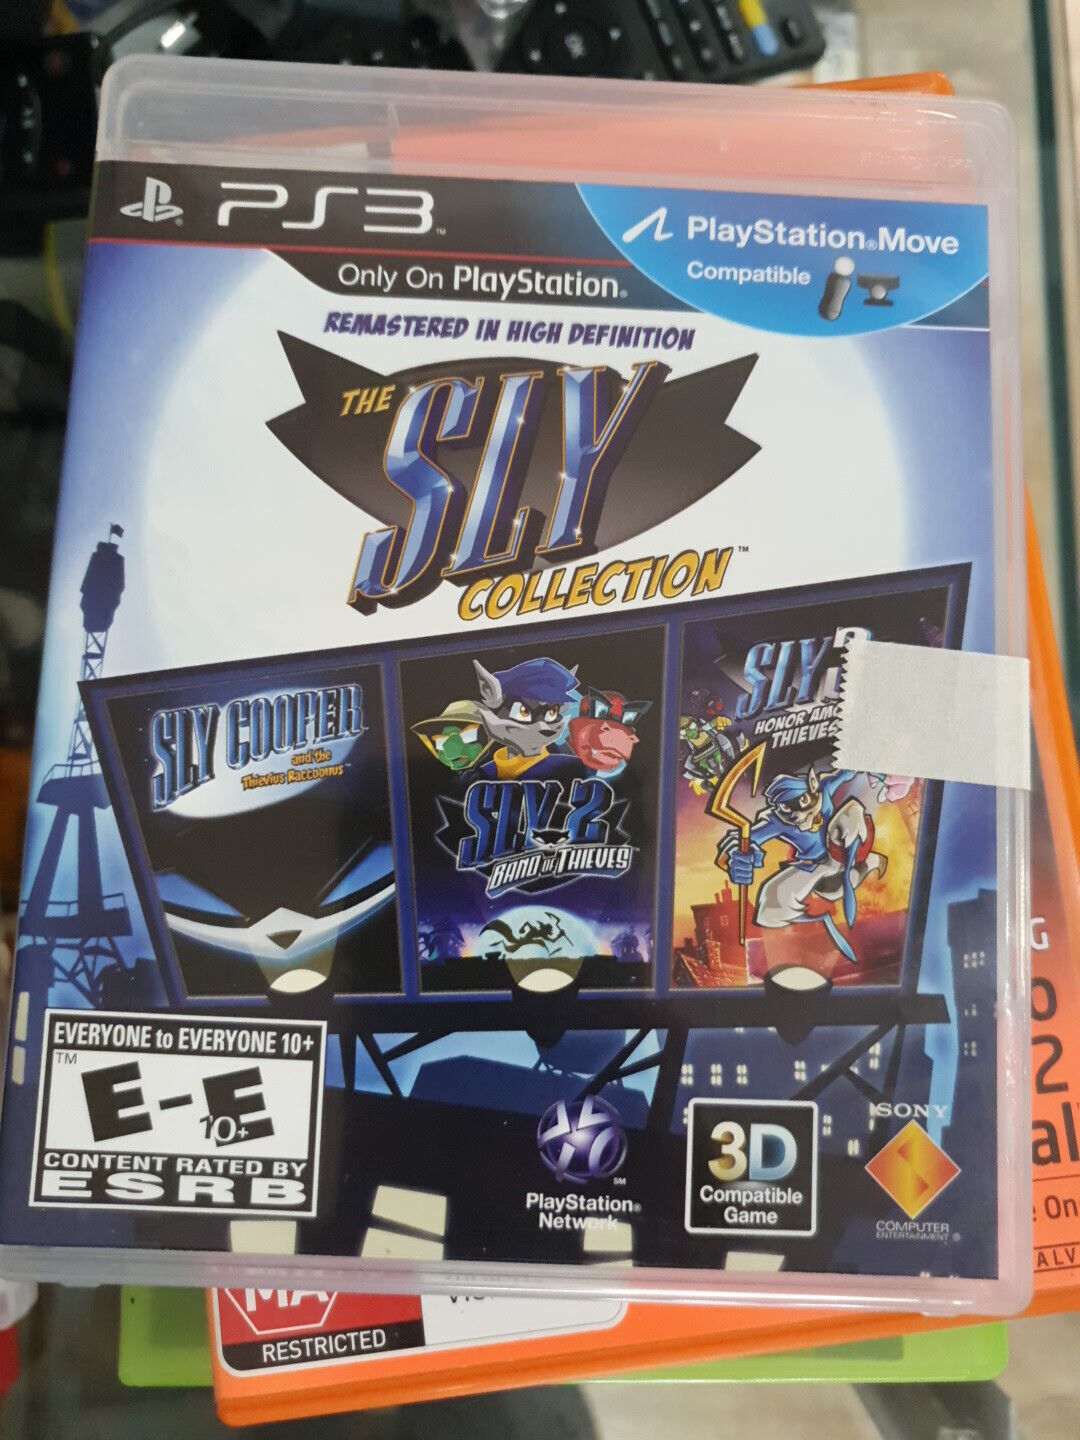 The Sly Cooper Collection PS3, Playstation | eBay